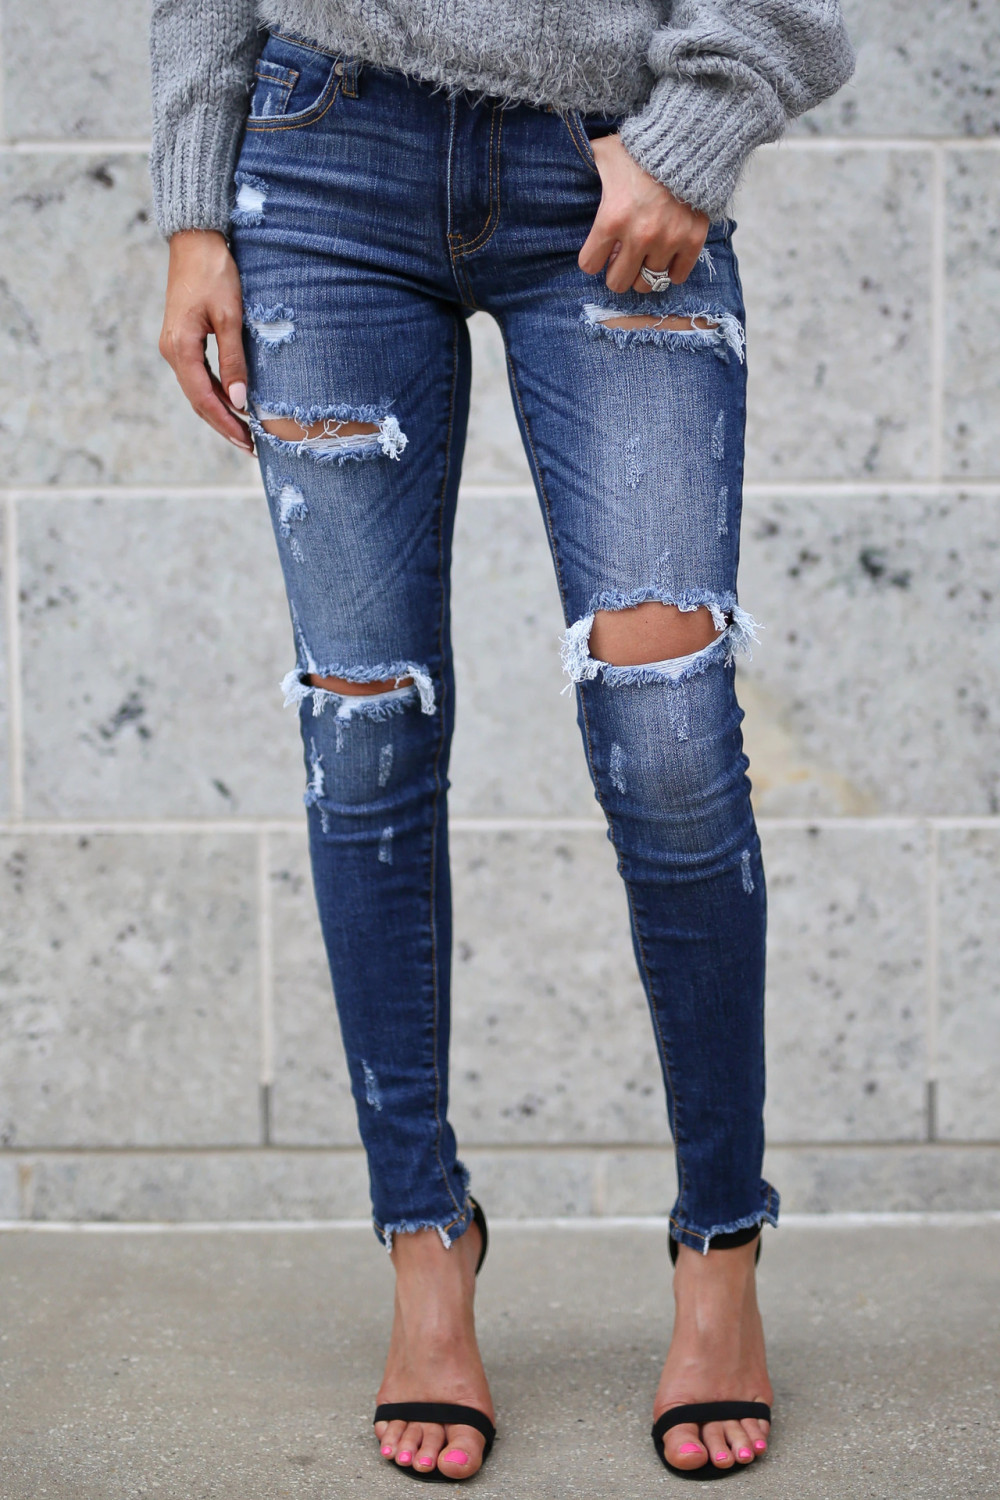 US$ 11.99 - Blue Ripped Washed Jeans - www.unishe.com